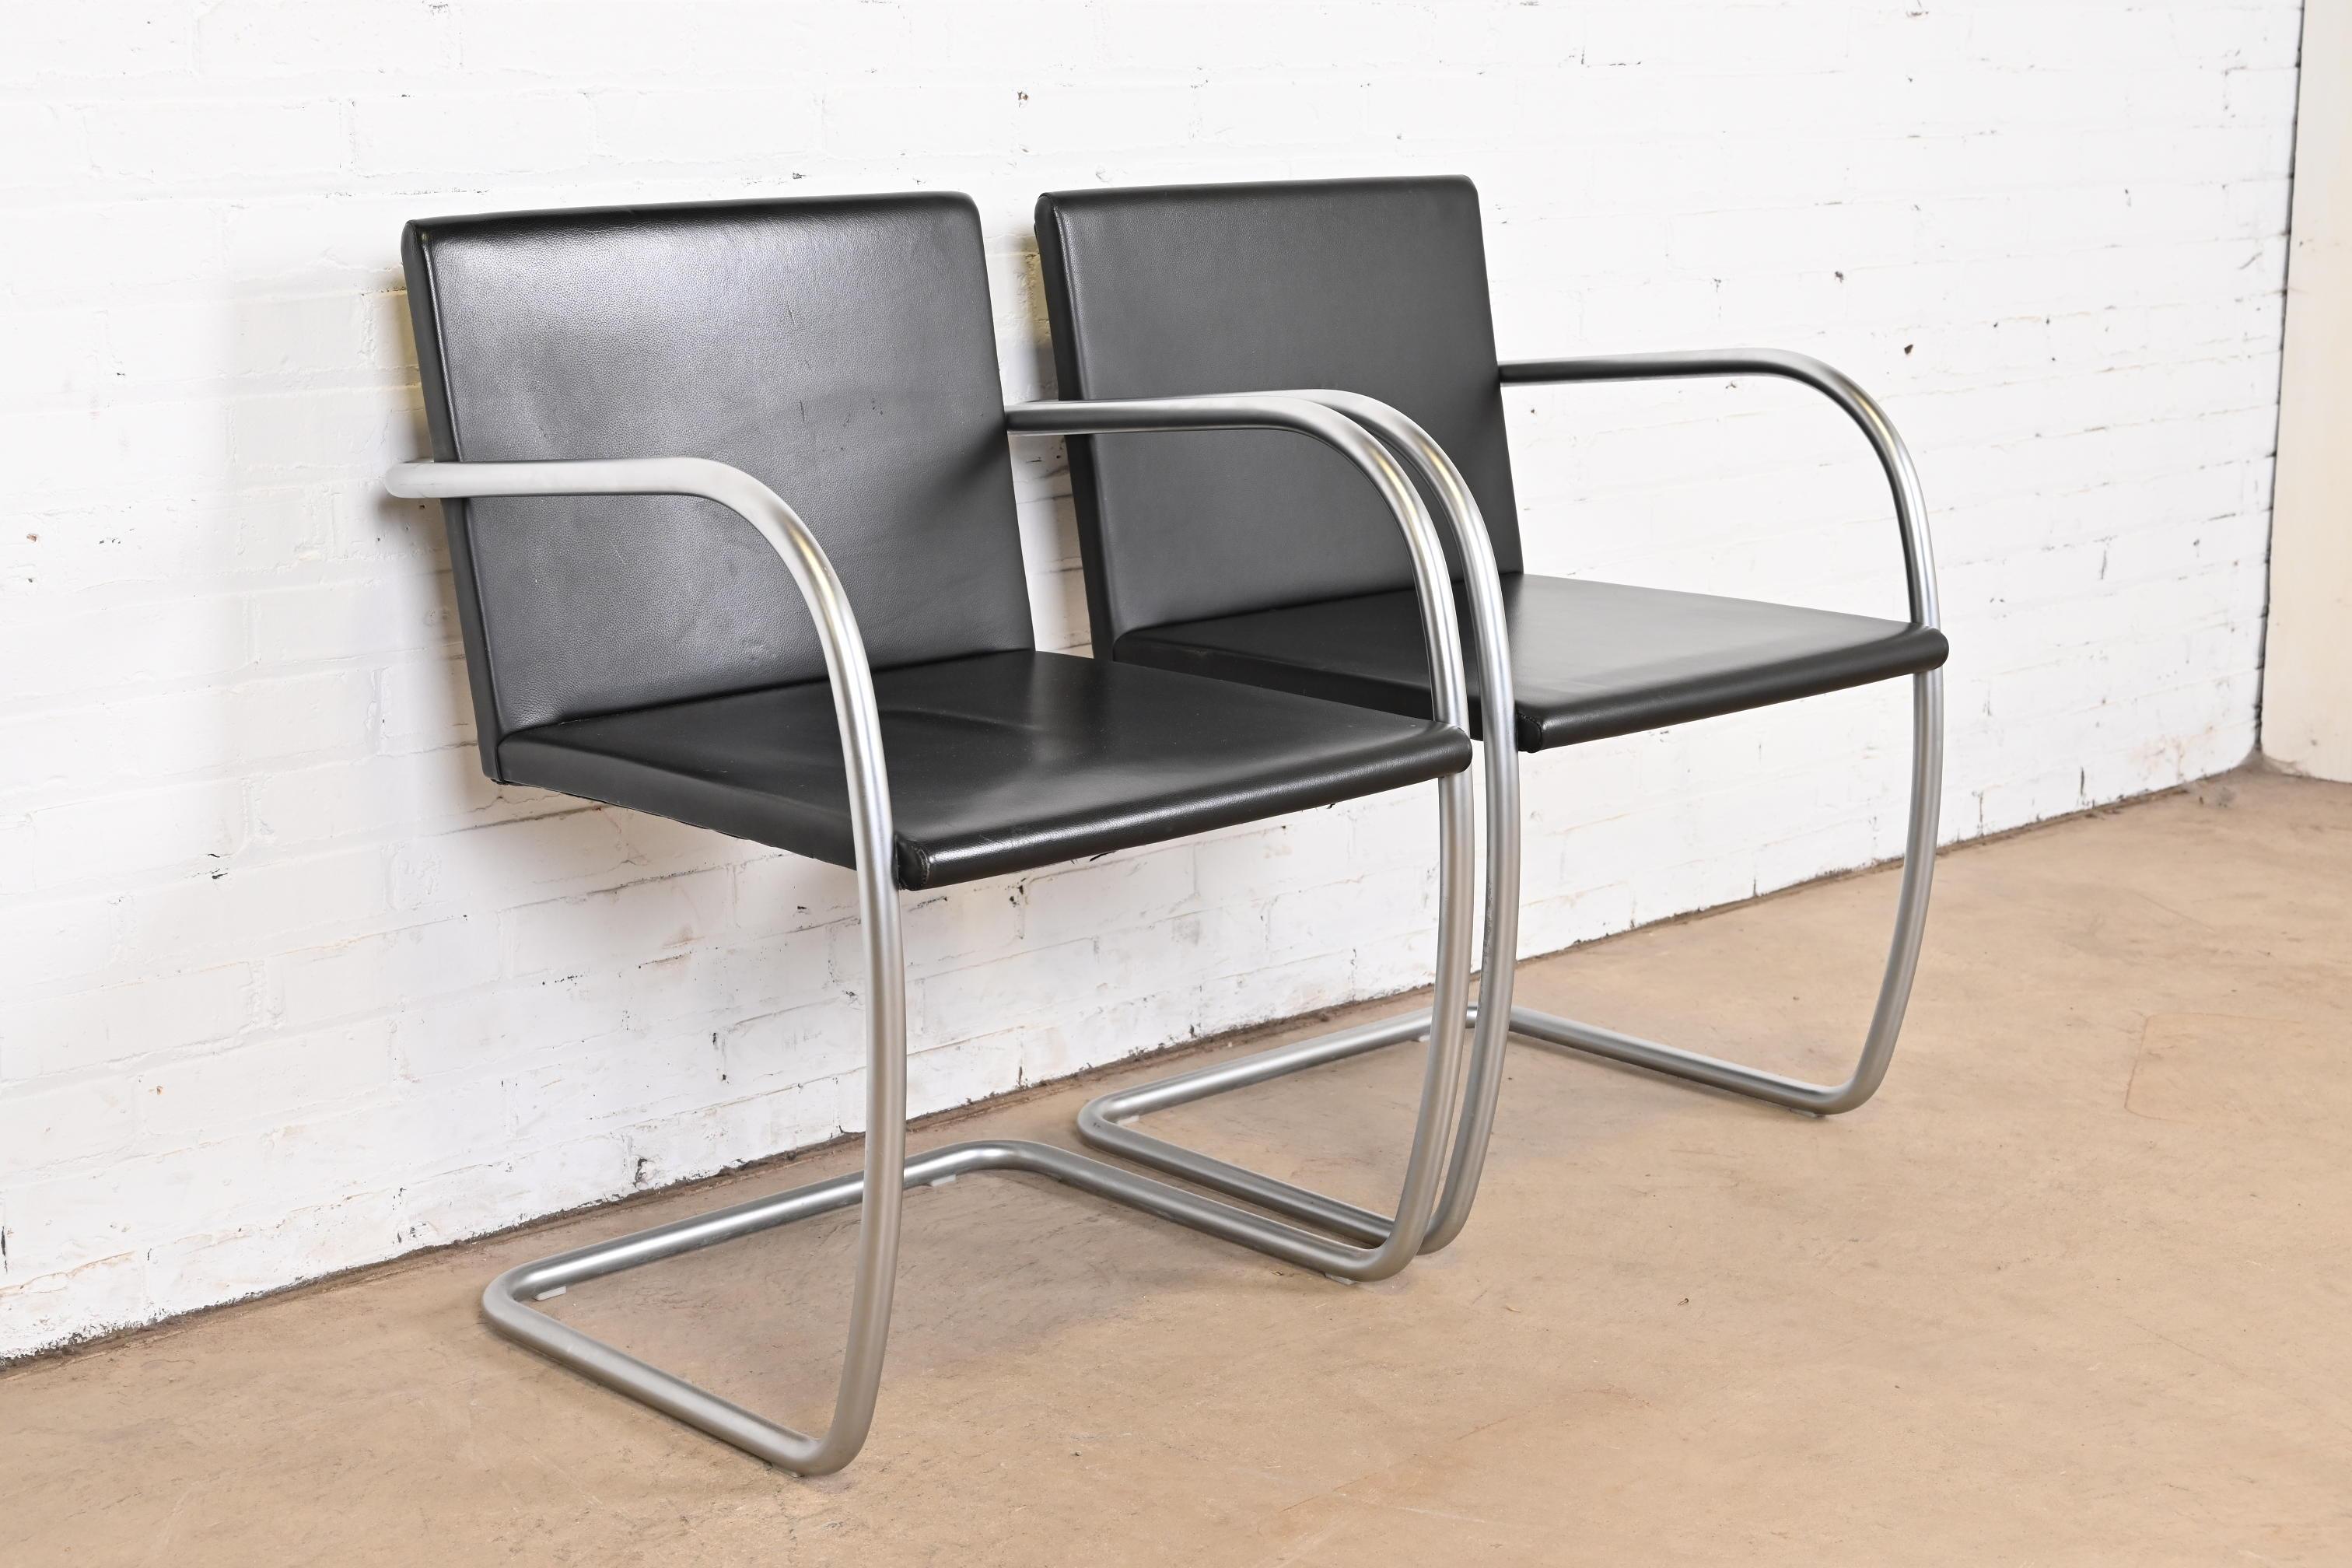 20th Century Mies Van Der Rohe for Knoll Black Leather and Chrome Brno Chairs, Pair For Sale